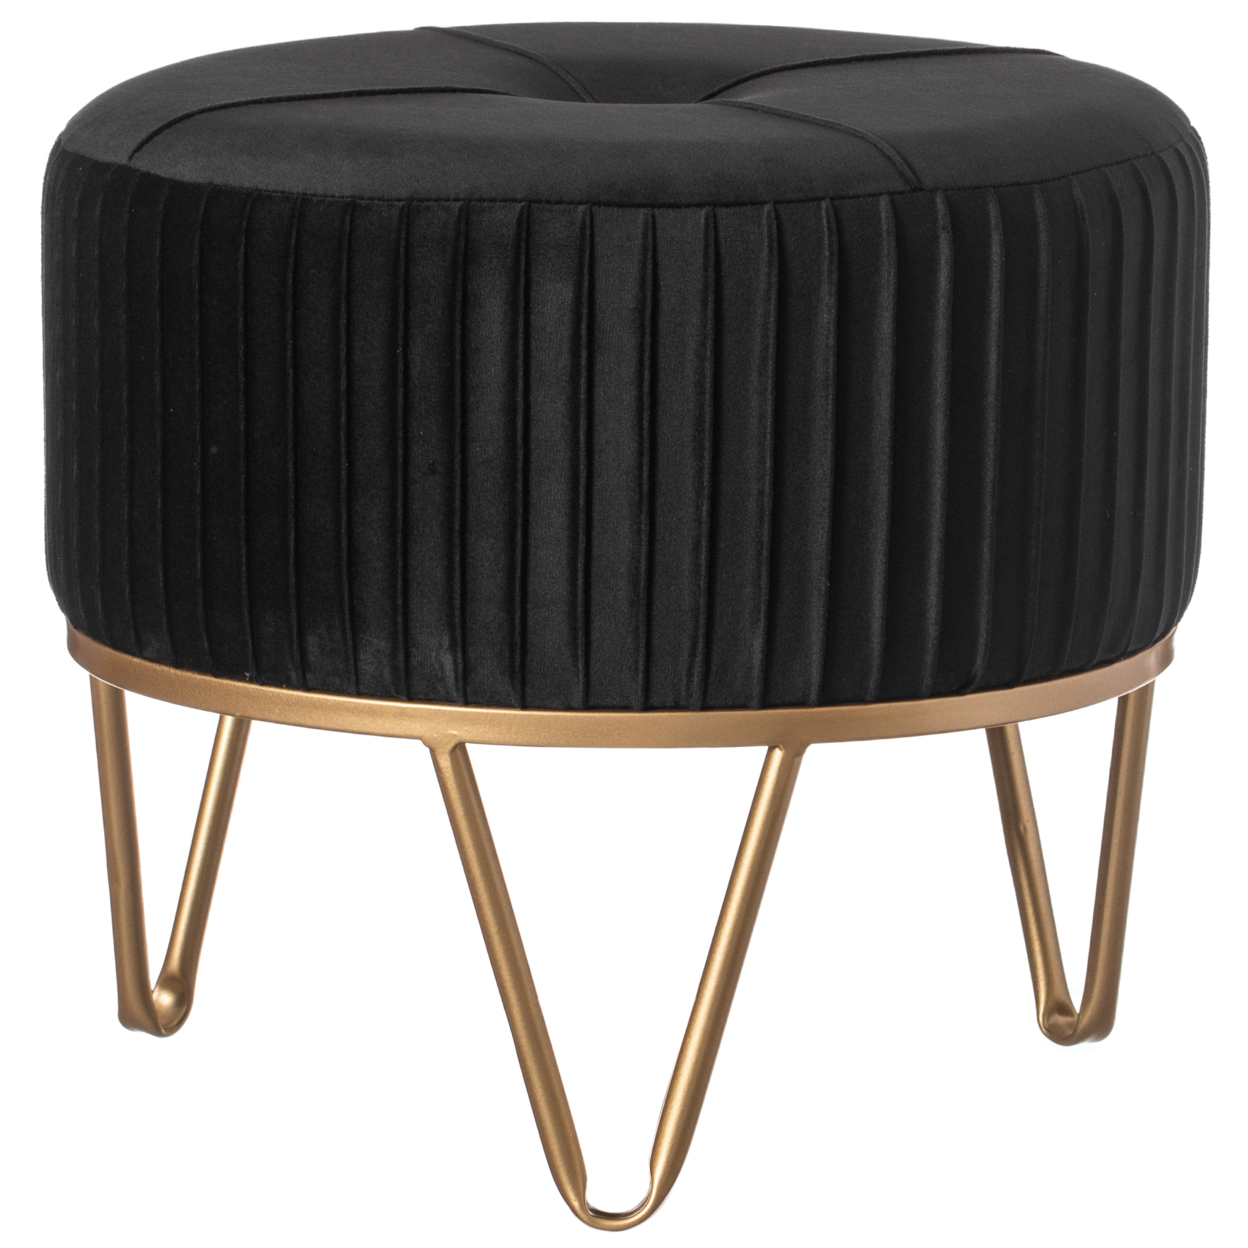 Round Velvet Ottoman Stool Raised With Hairpin Gold Base - Black Small